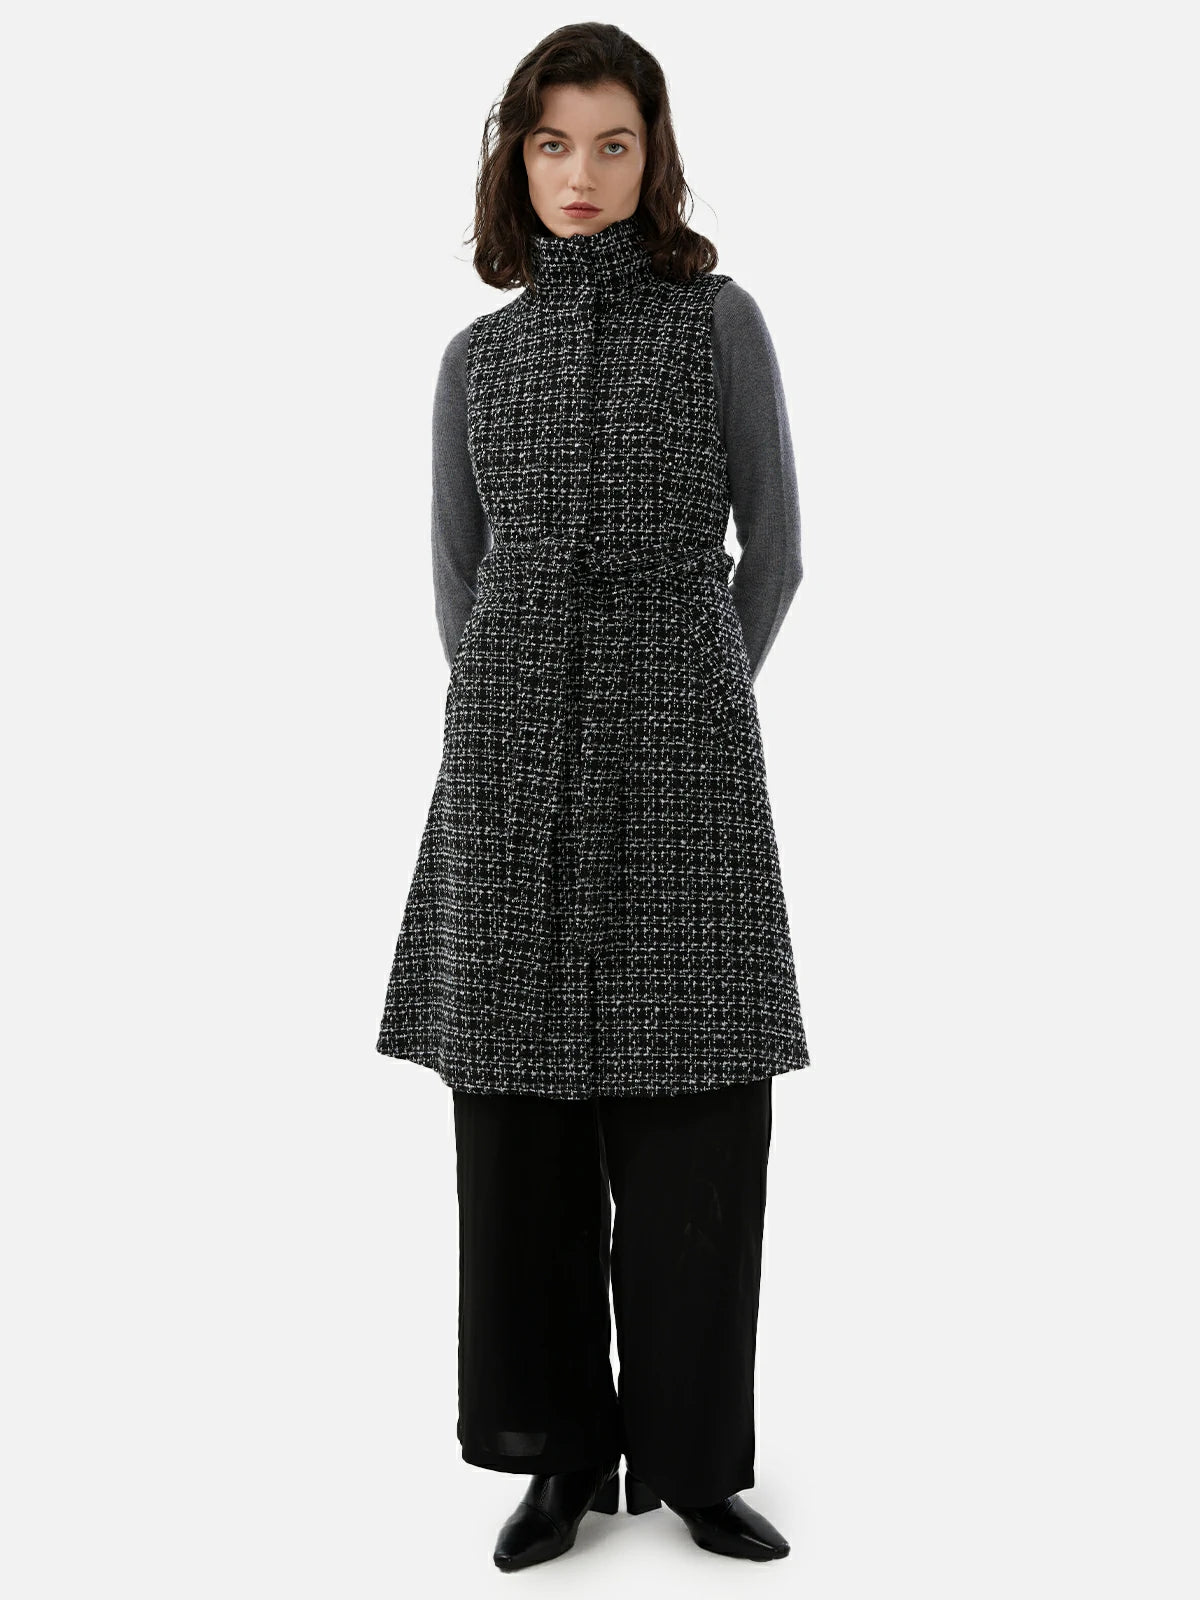 Stylish checkered woolen vest: Adding unique style to winter clothing